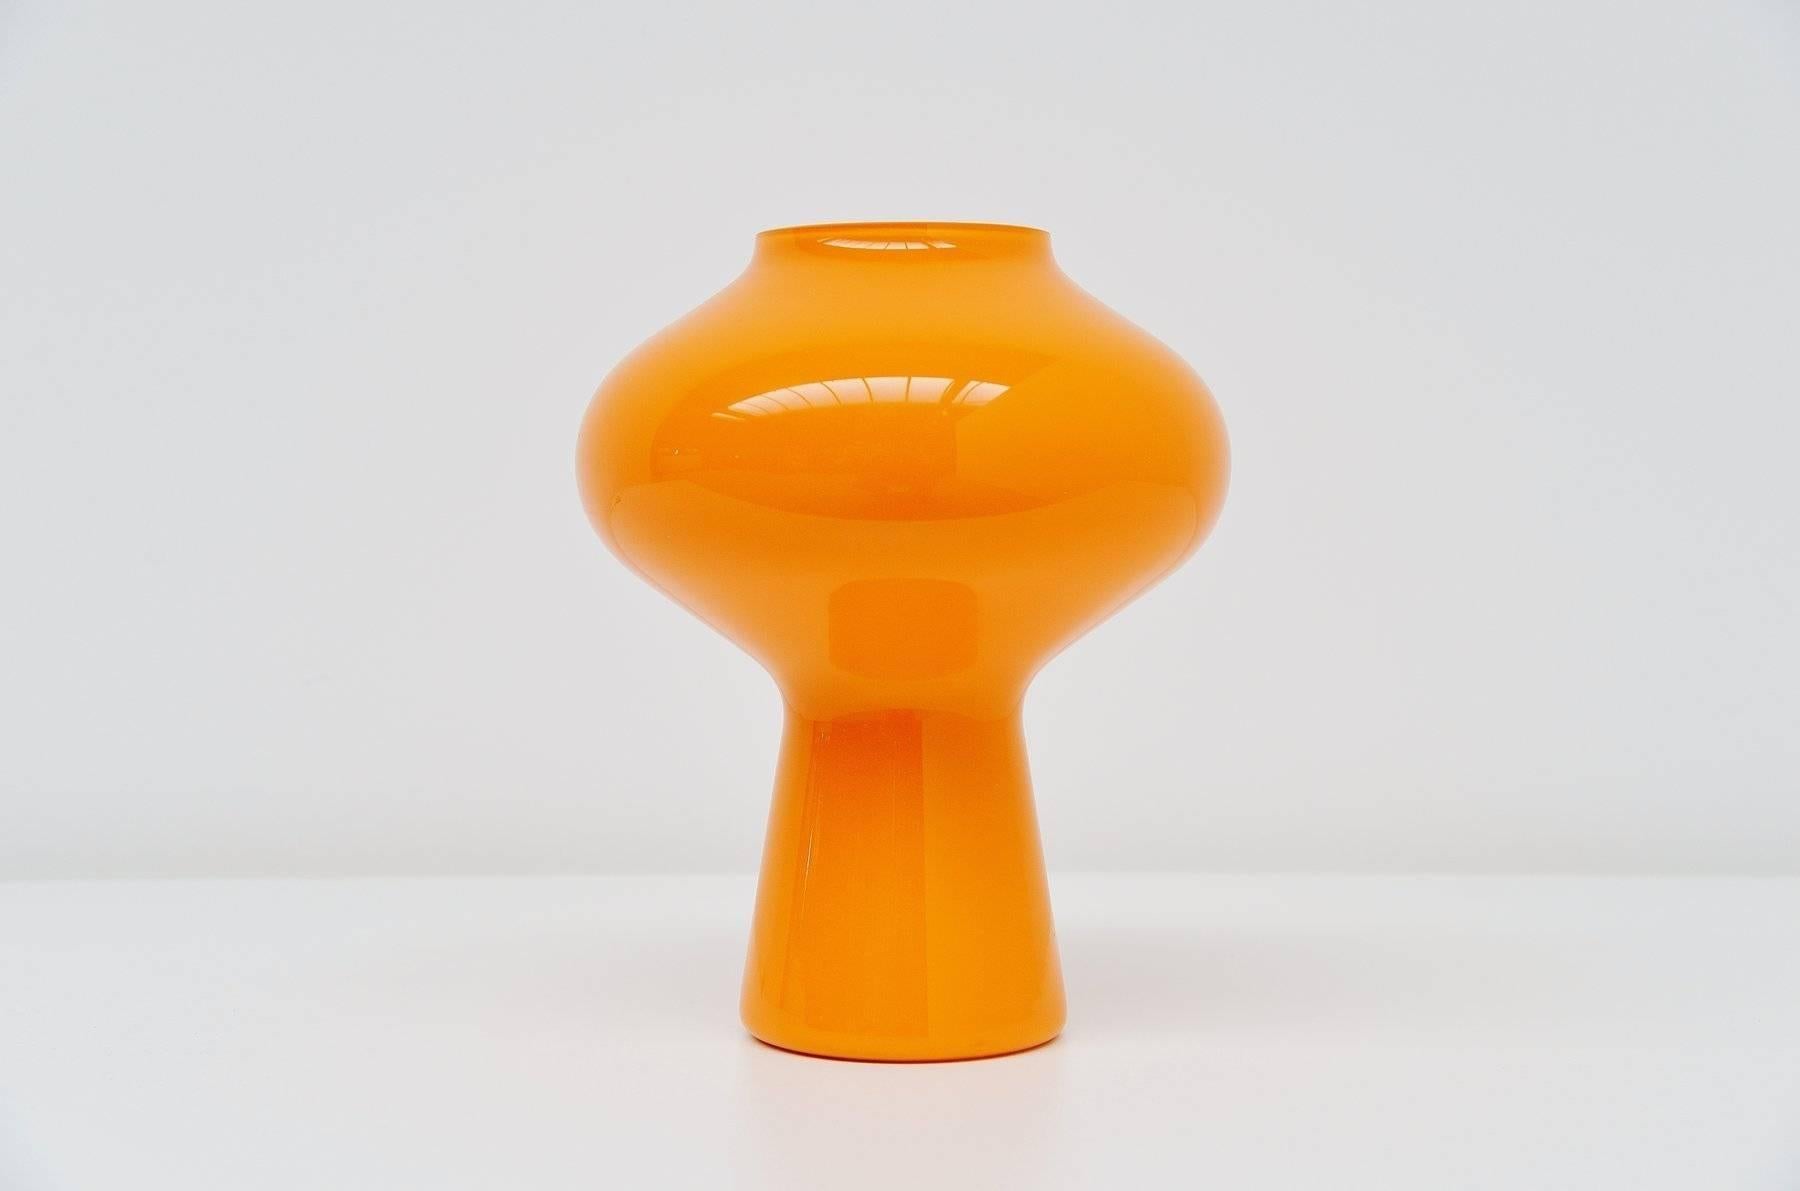 Medium sized Fungi table lamp designed by Massimo Vignelli for Venini Murano, Italy, 1960. This is the middle size of the three sizes that were made. Its made of very nice bright orange glass and gives very nice warm light when lit. Very nice and